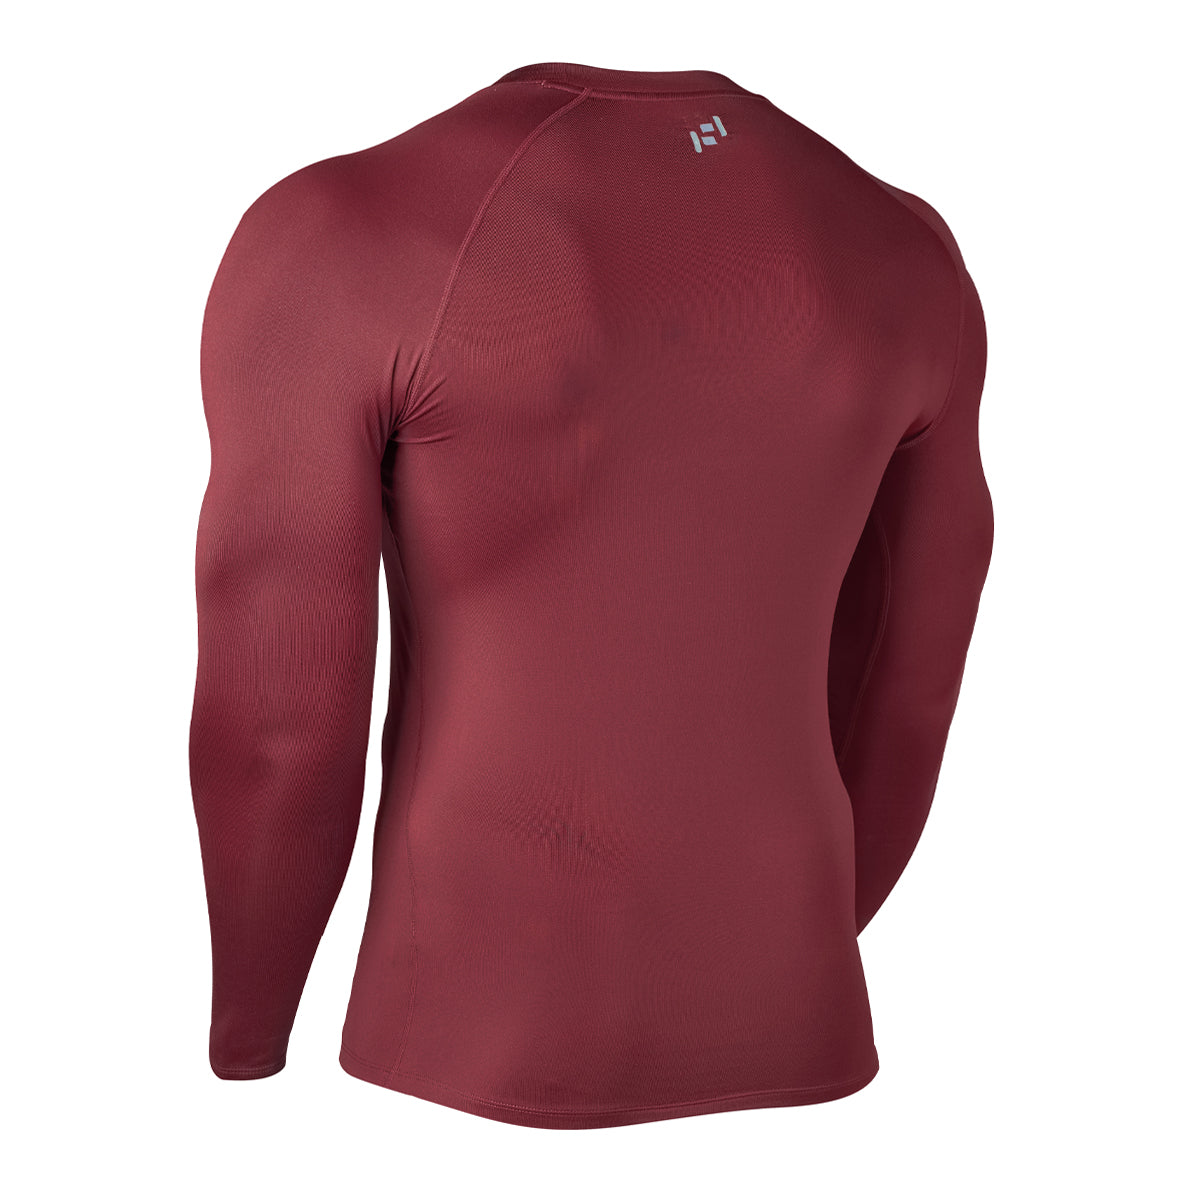 Essential Thermal Base Layer Shirt Maroon